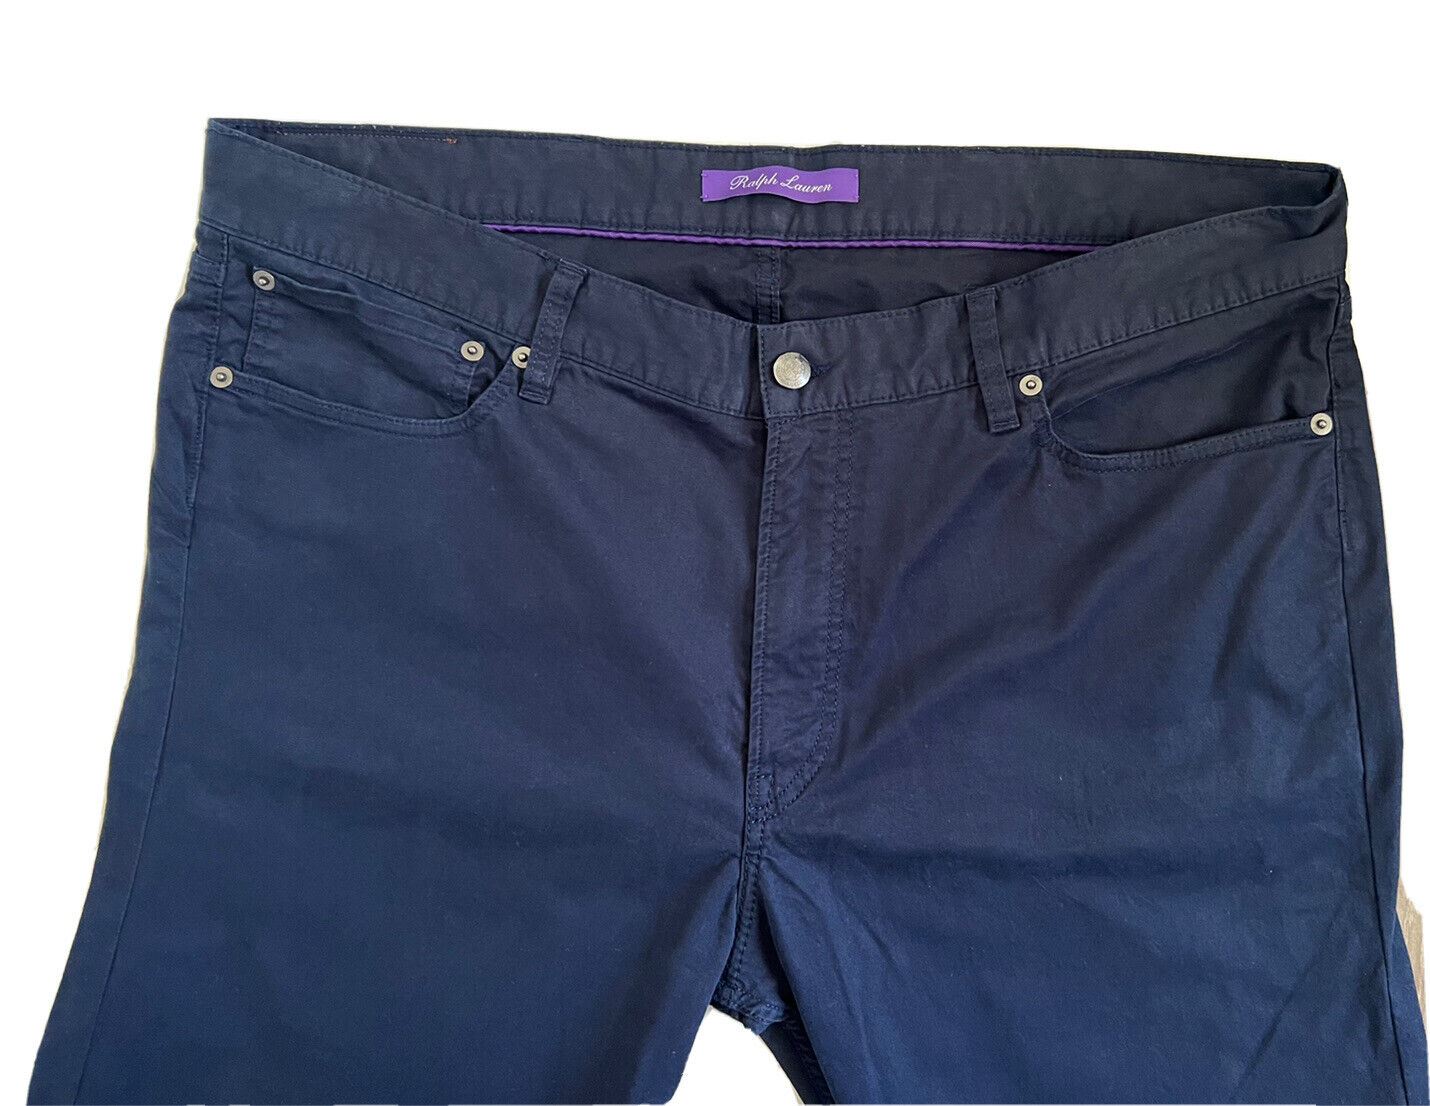 NWT $495 Ralph Lauren Purple Label Slim Fit Casual Pants 38 US Made in Portugal